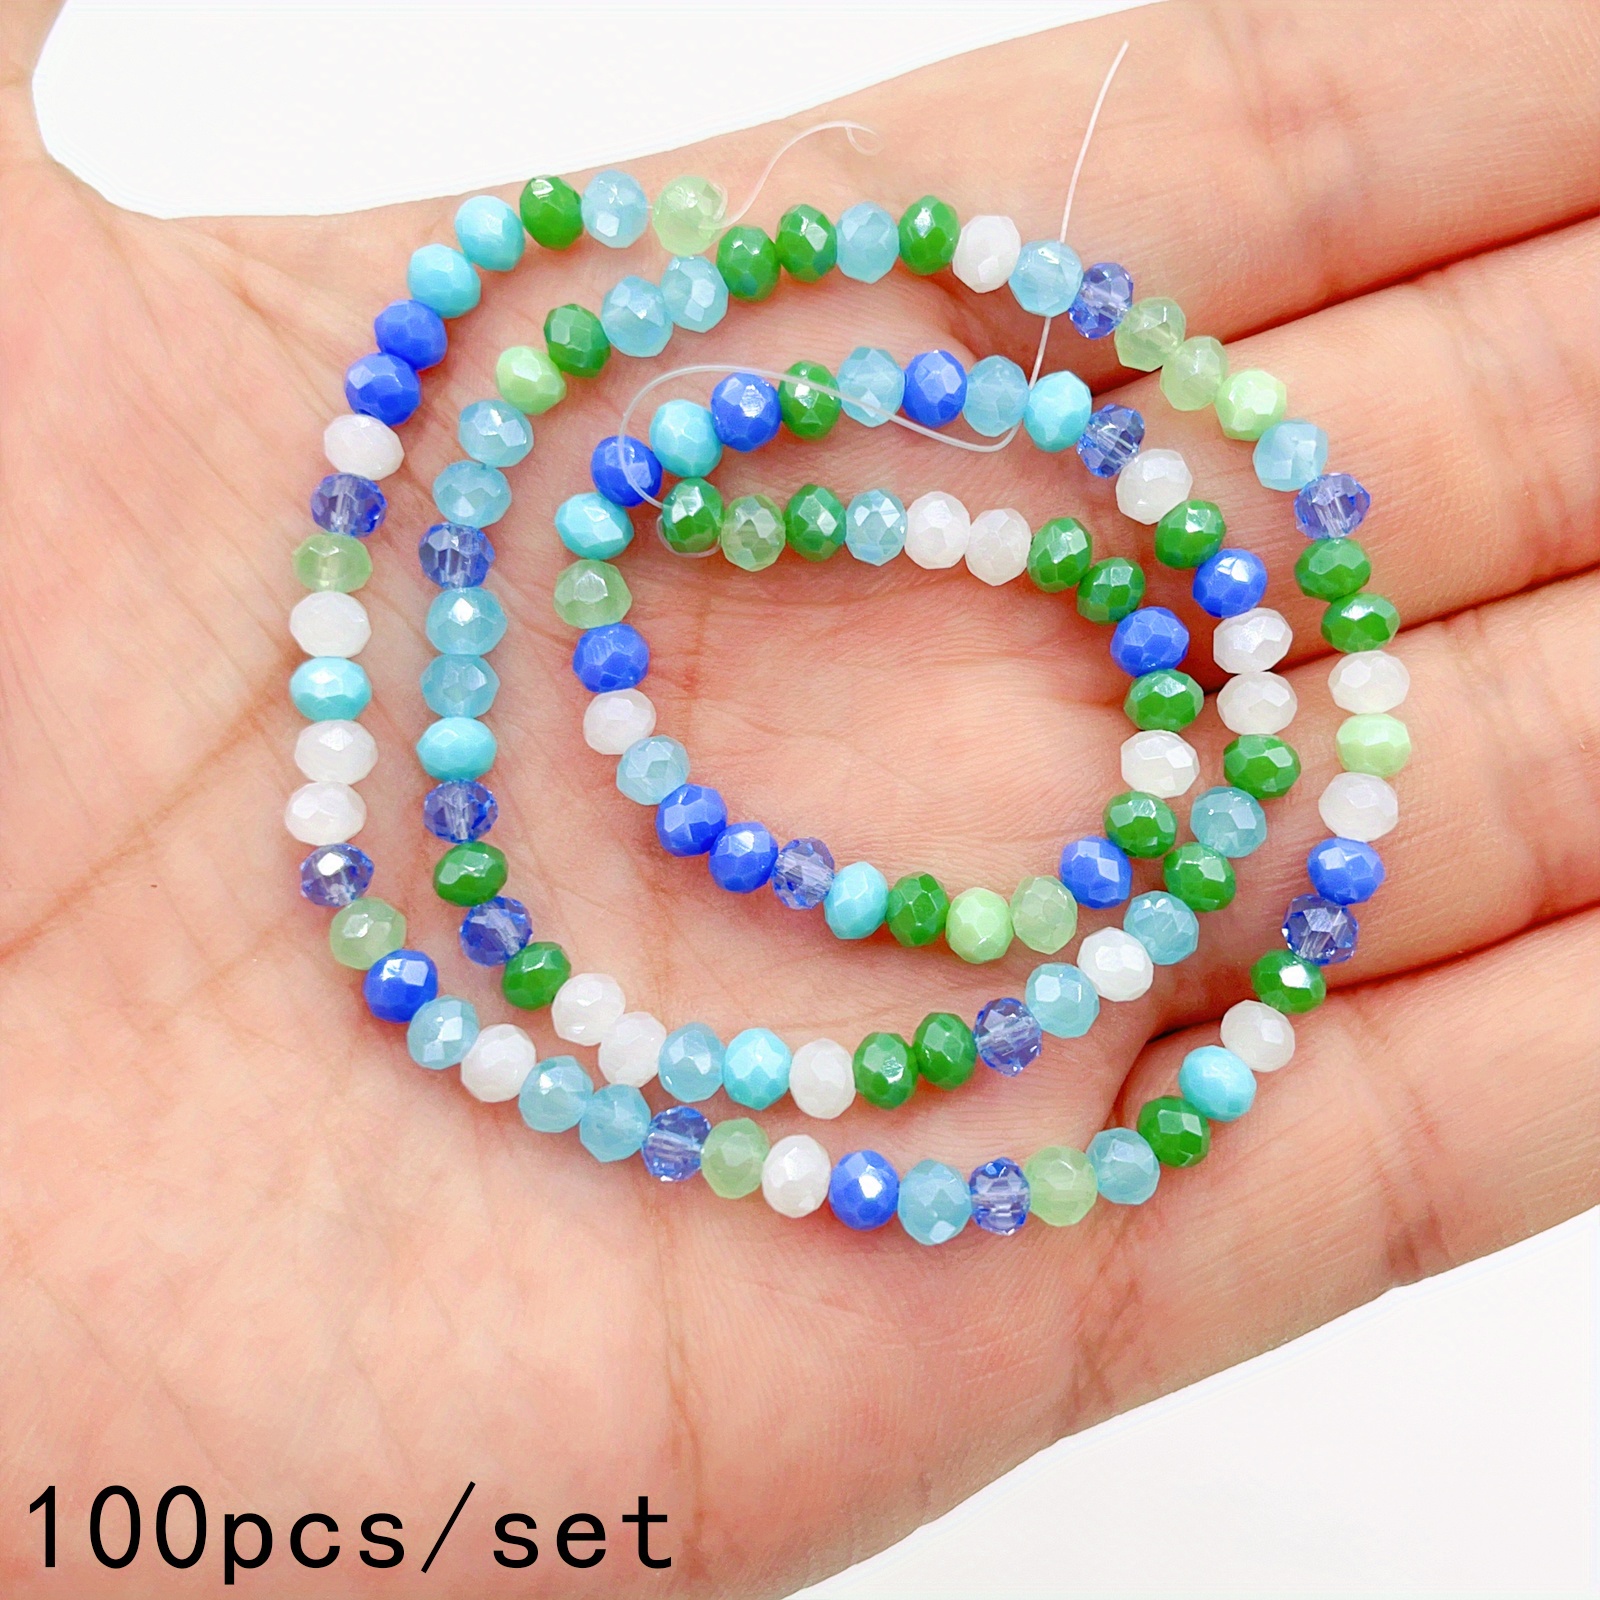 100pcs Mixed Colors Glass Crystal Beads 8mm Faceted Rondelle Loose